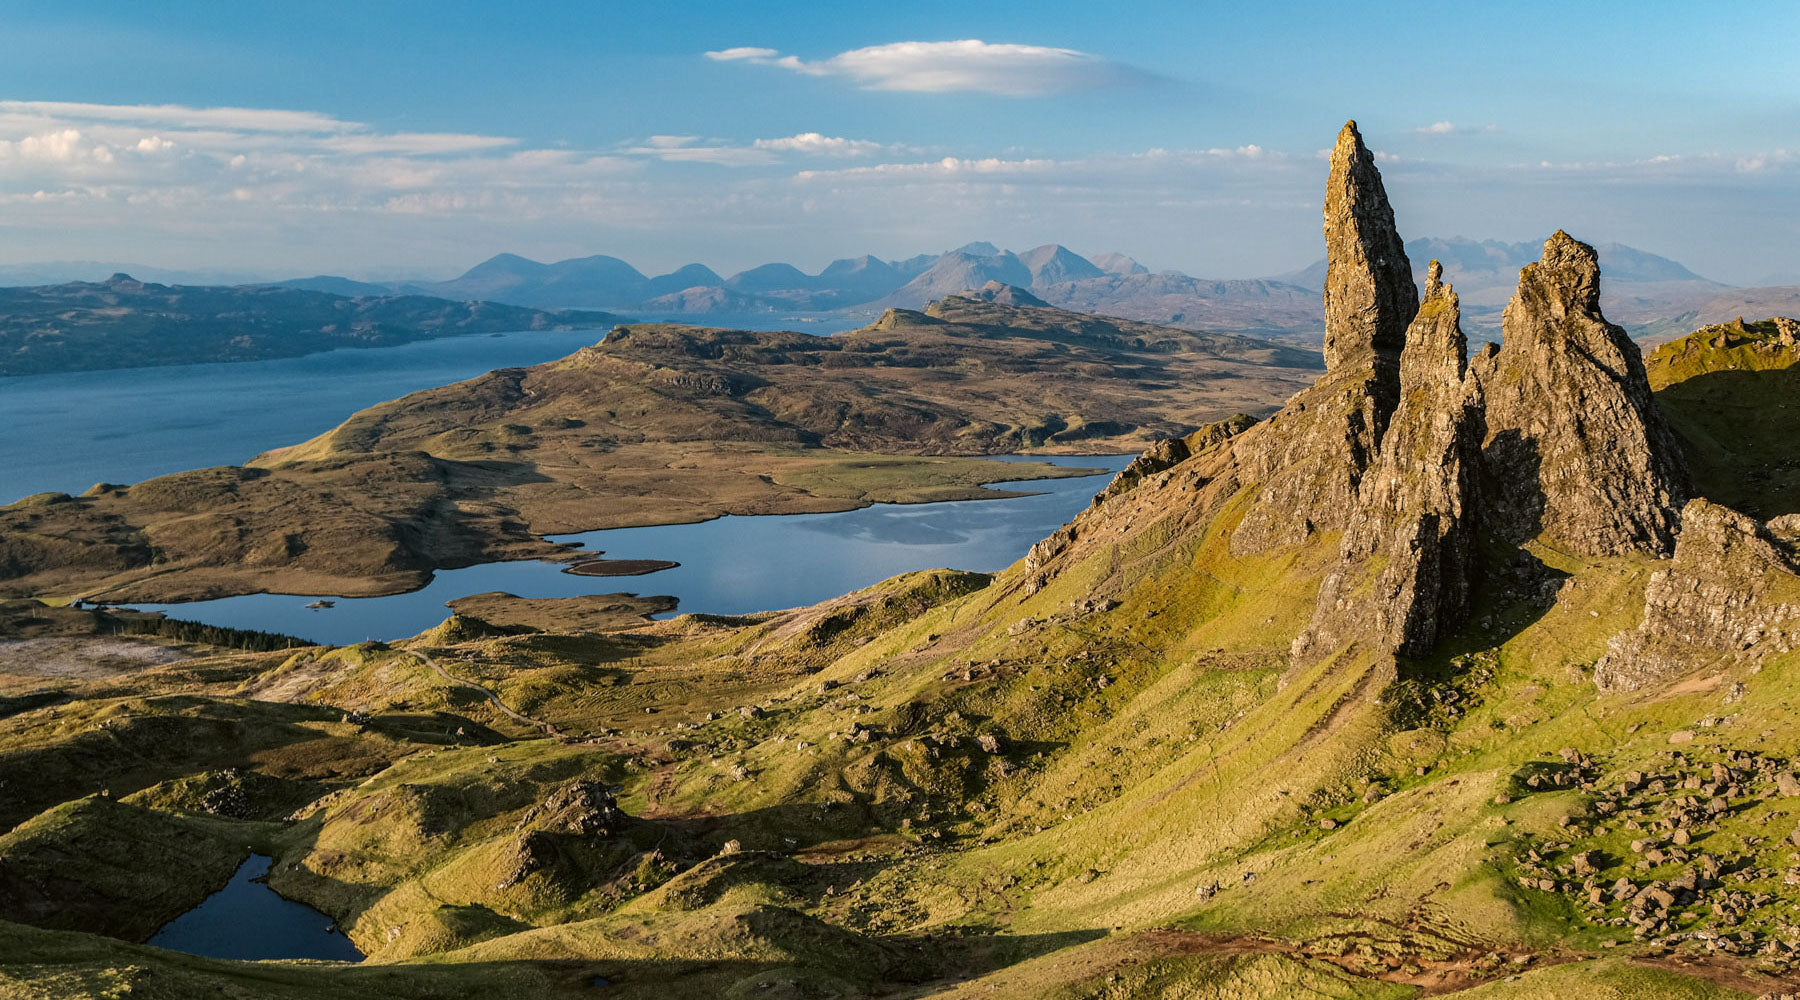 The Old Man of Storr is a rocky hill on the Trotternish peninsula of the Isle of Skye in Scotland